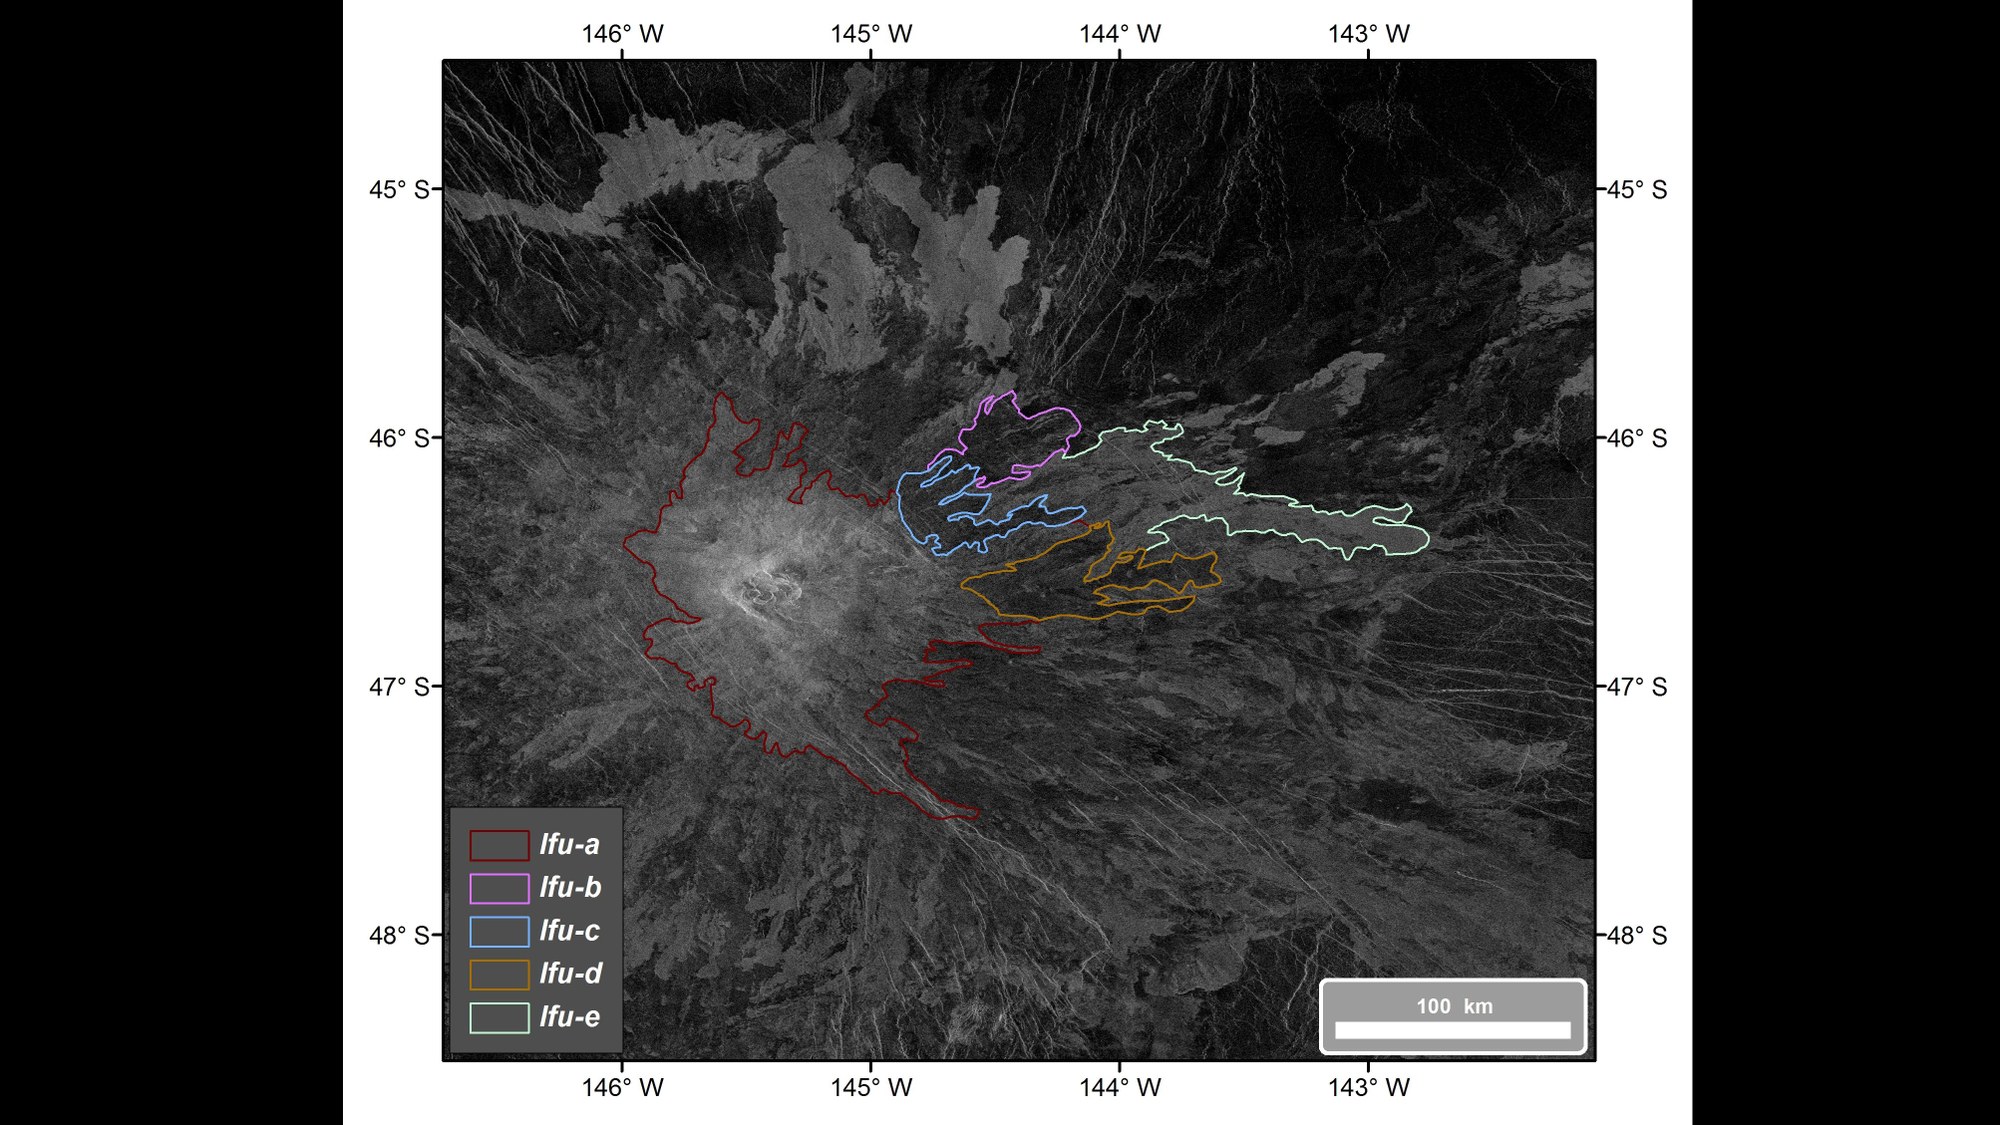 Five lava flow units identified during the mapping process